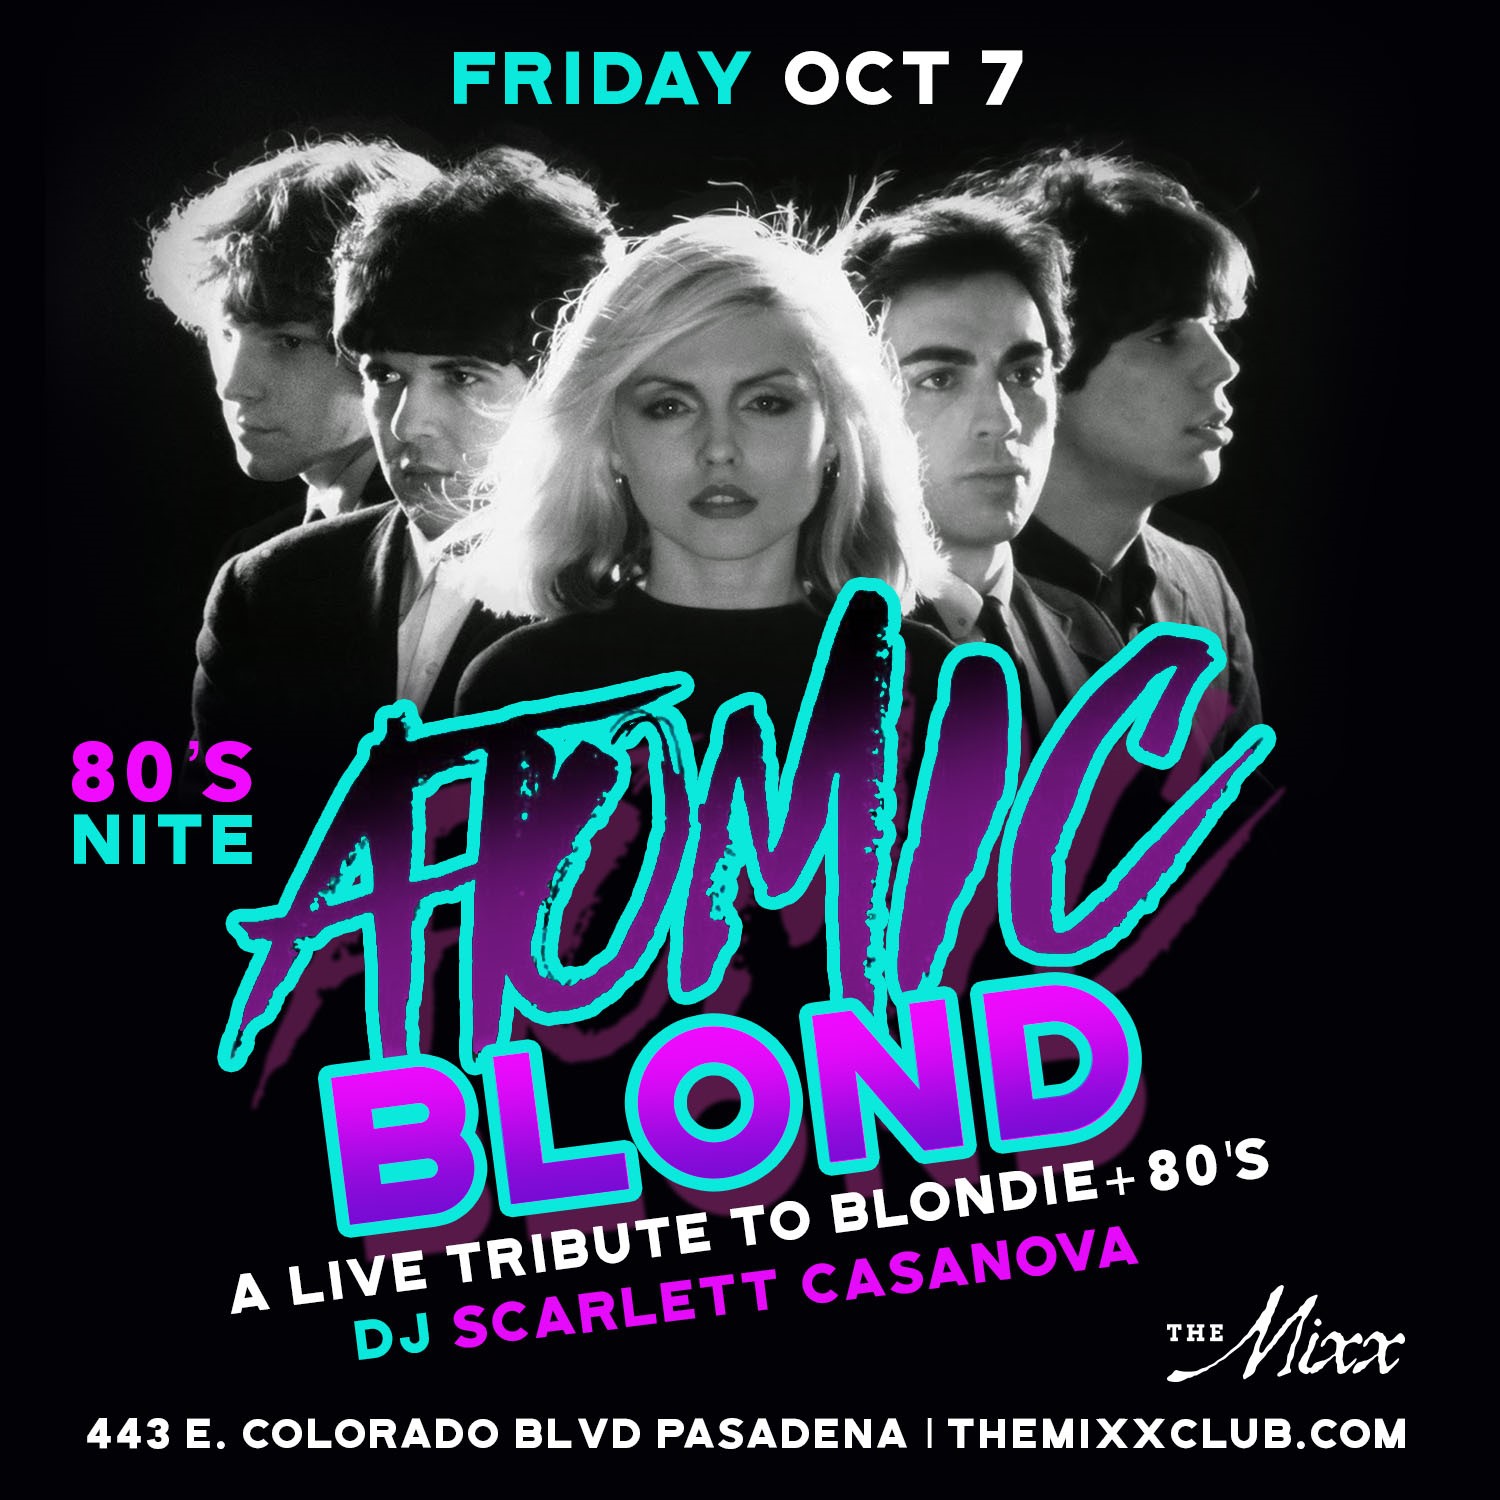 You are currently viewing 80’s Night with Atomic Blond, A live tribute to Blondie & The 80s